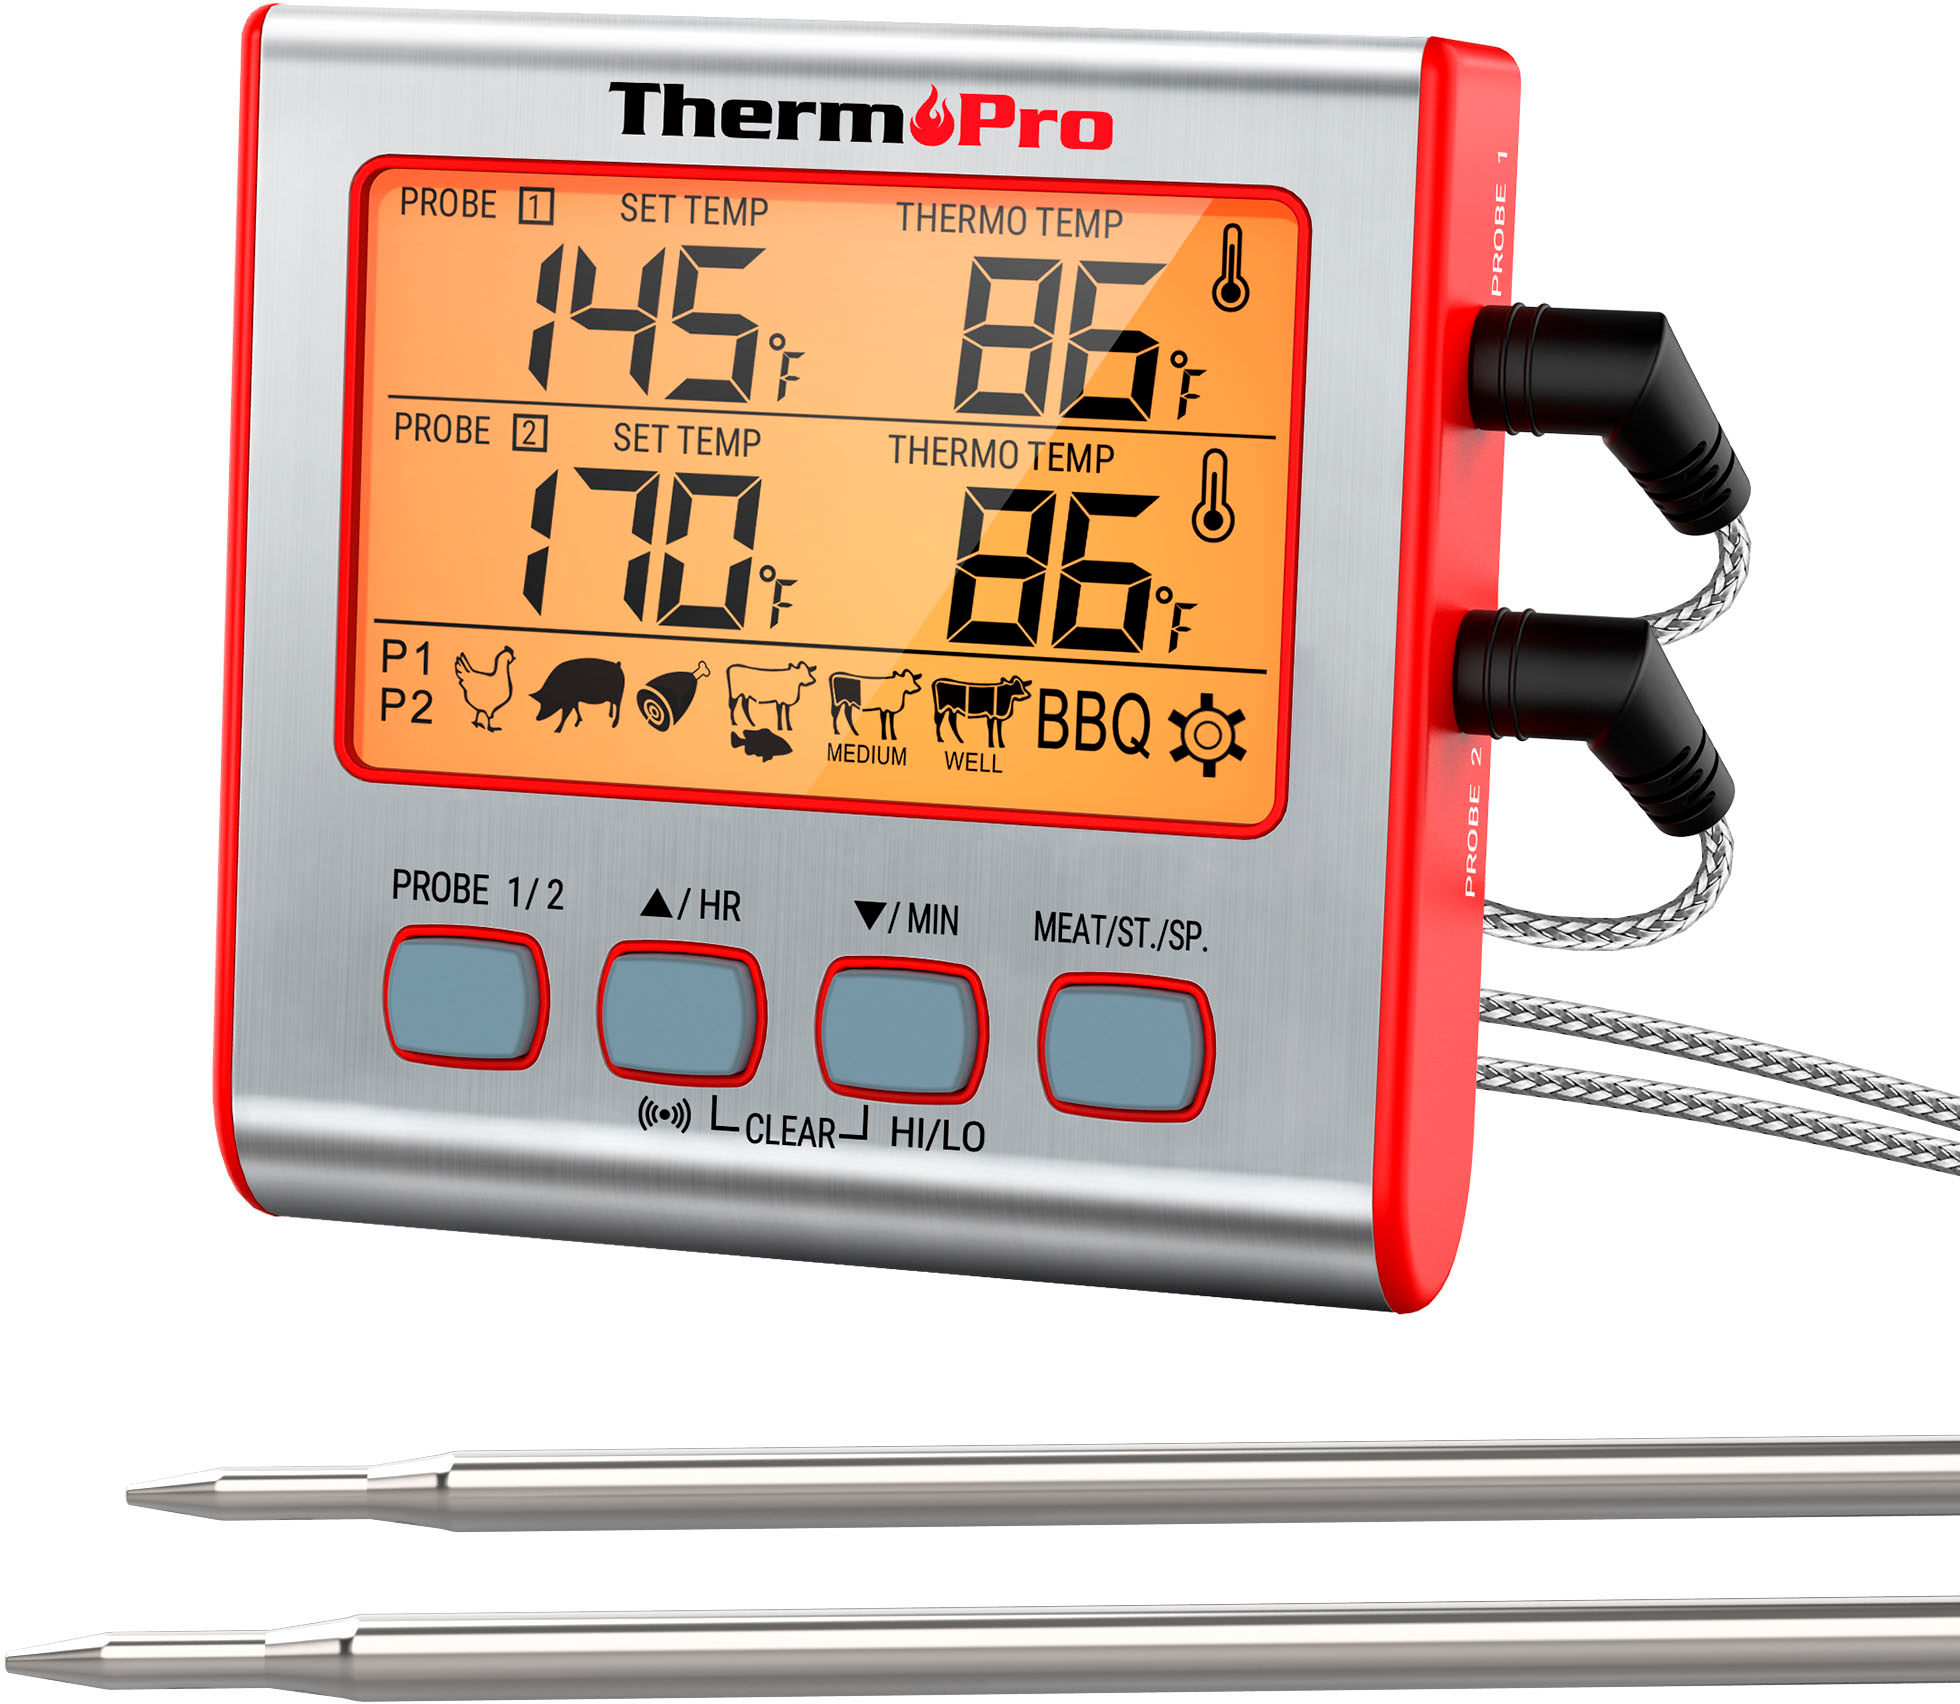 0810012961745 - THERMOPRO - DUAL PROBE DIGITAL COOKING MEAT THERMOMETER - RED